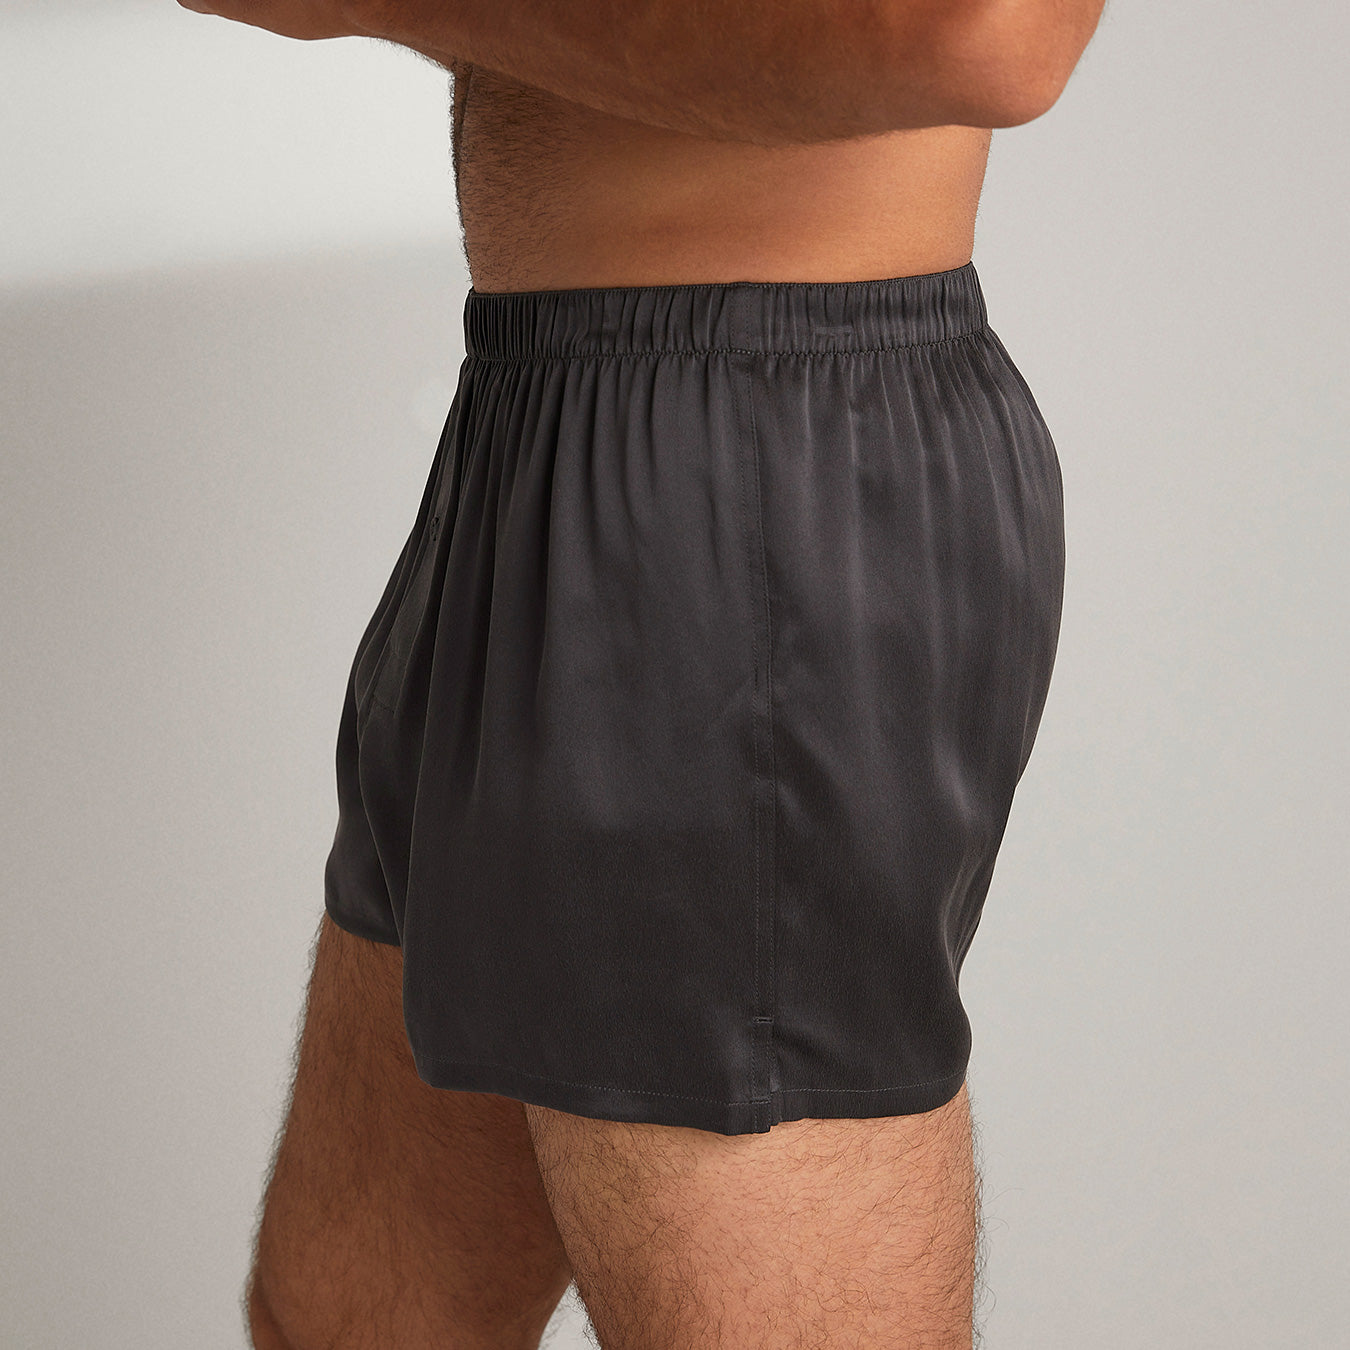 Men's Soft Supportive Seamless Modal Boxer Brief – Lunya